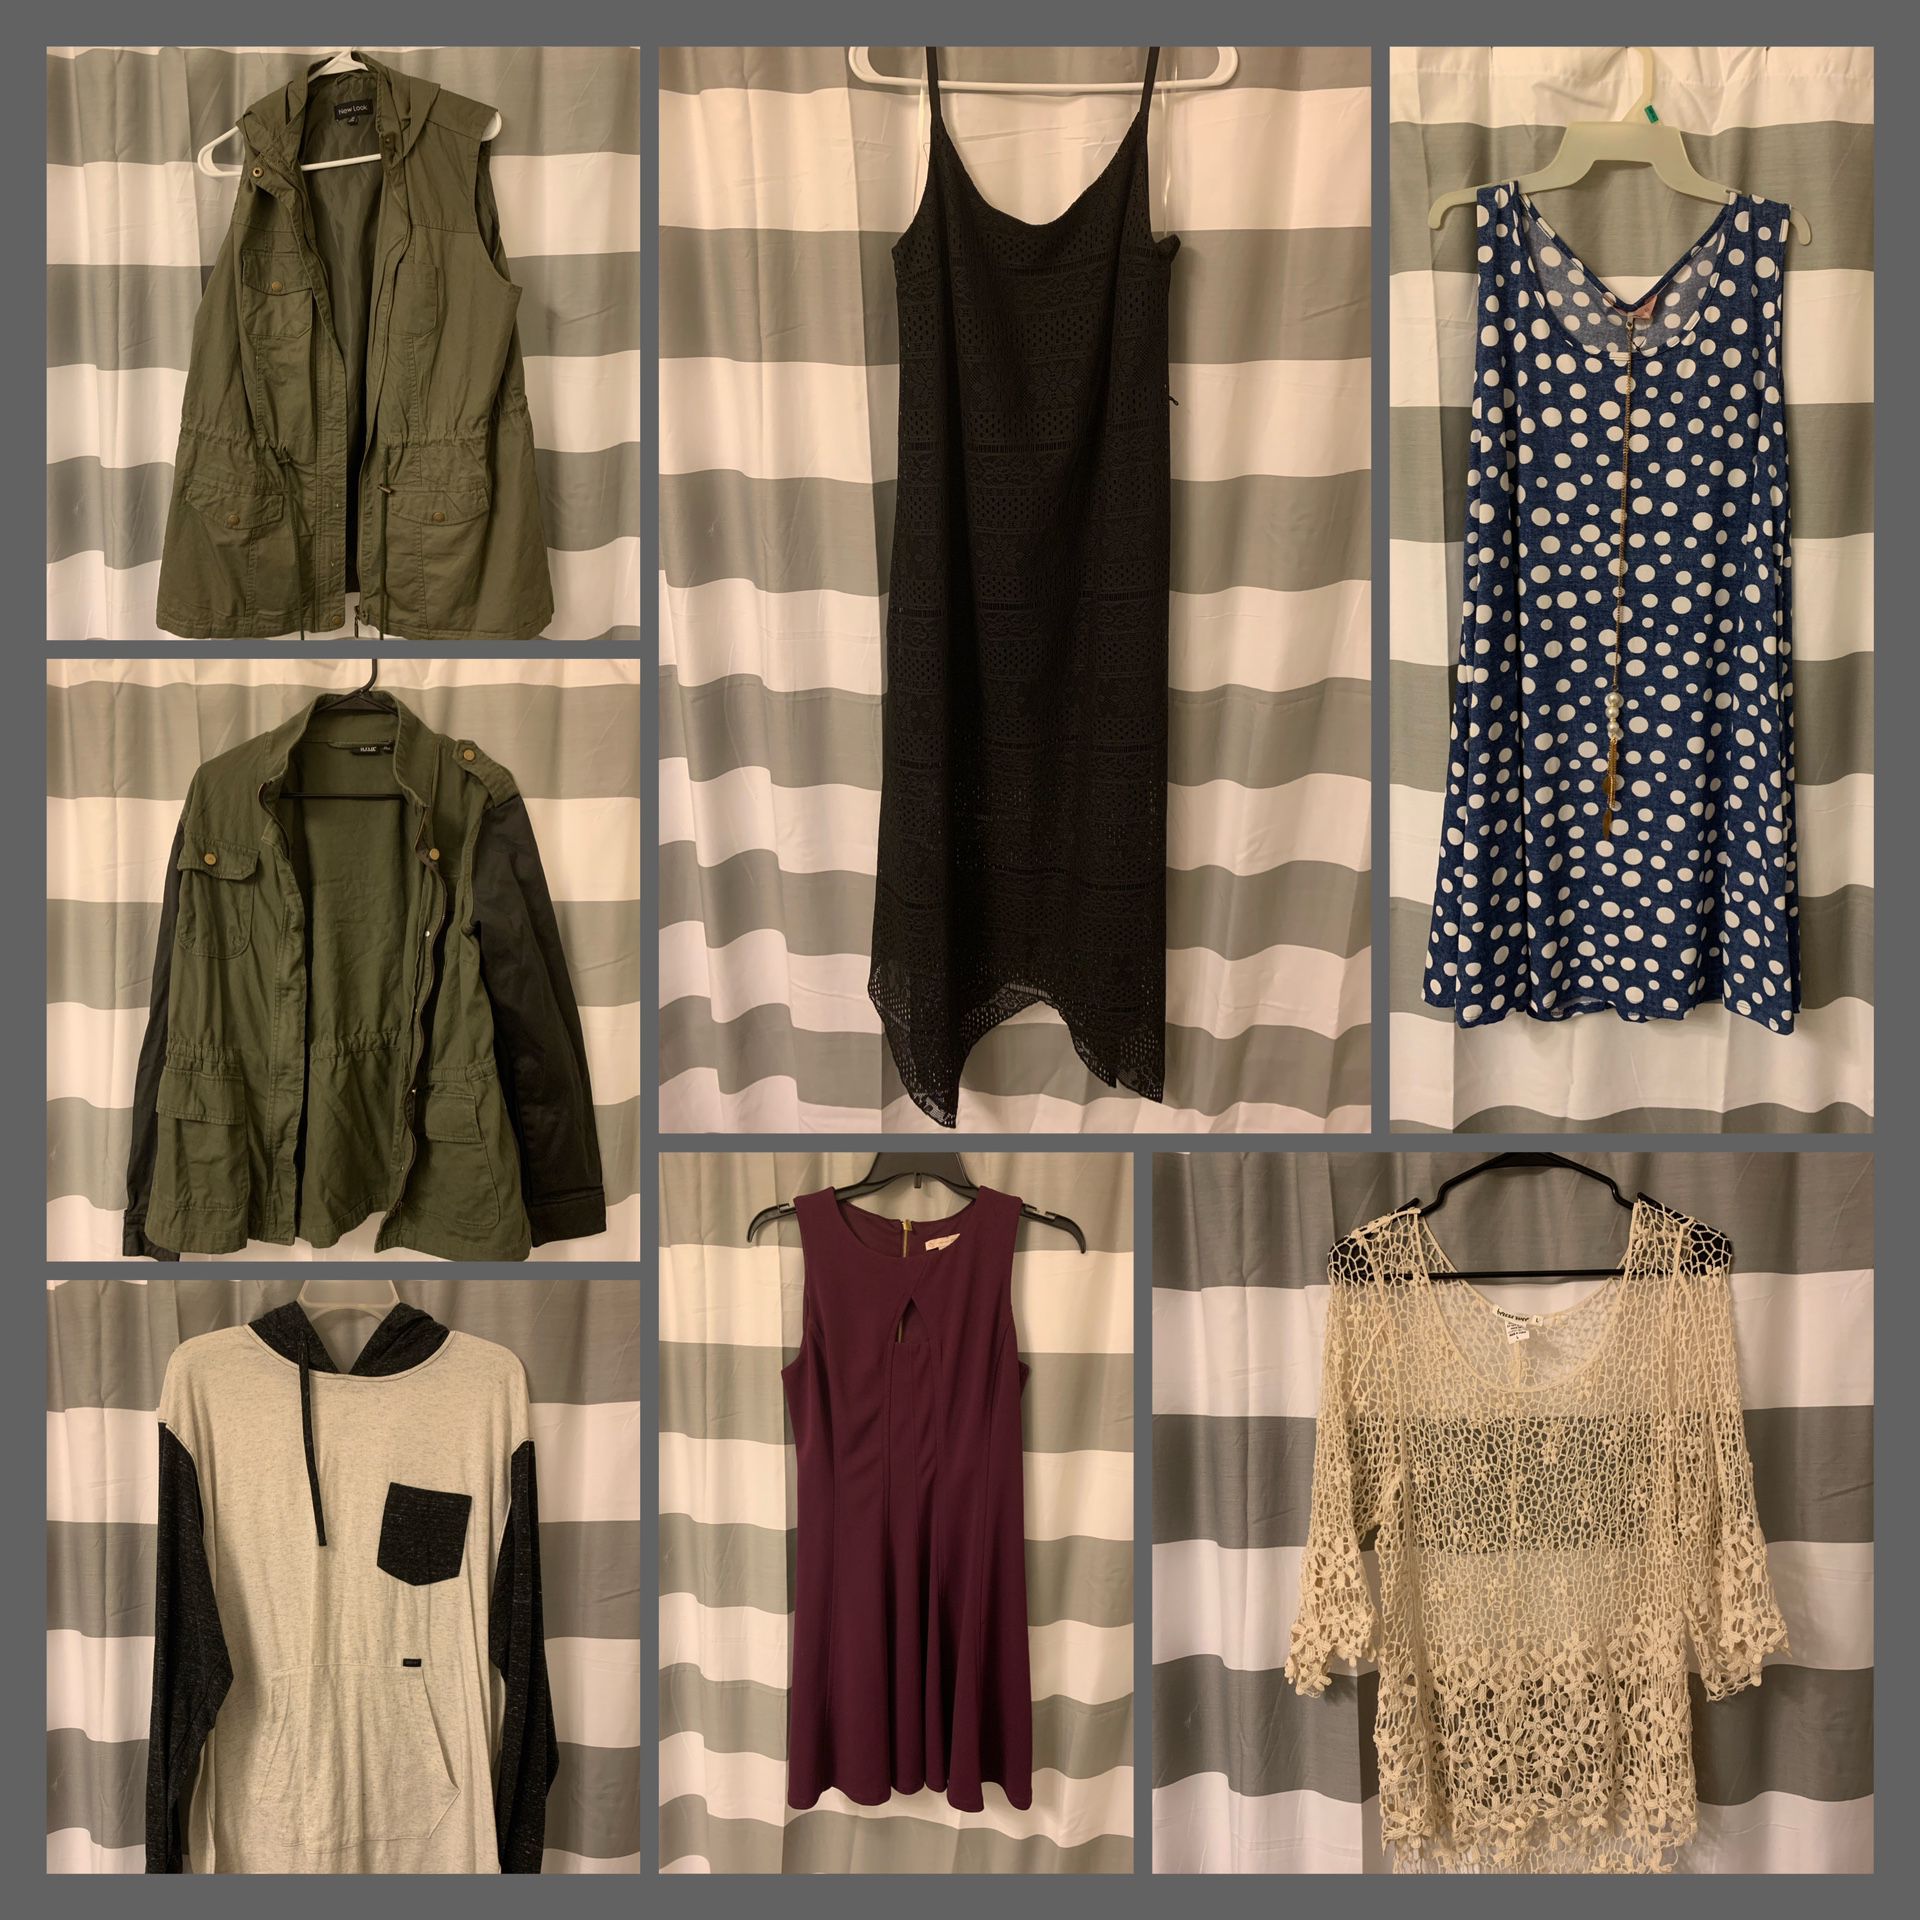 Various Dresses, Tops, and Jackets